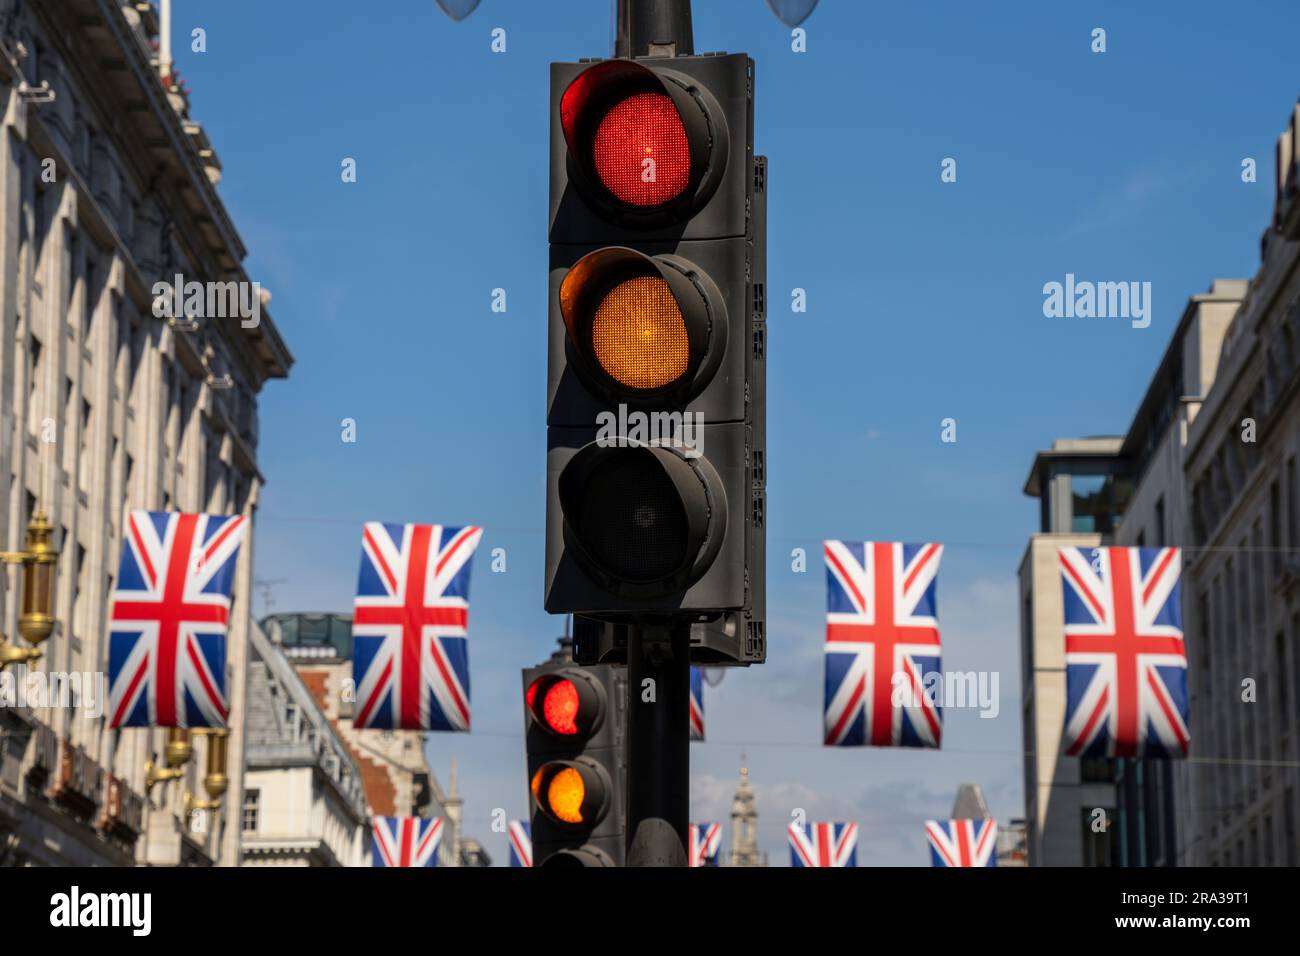 Stoplight, a yellow and red traffic light on a city street in London with UK flags. Confusing, mixed signals, conceptual metaphor for life choices. Stock Photo